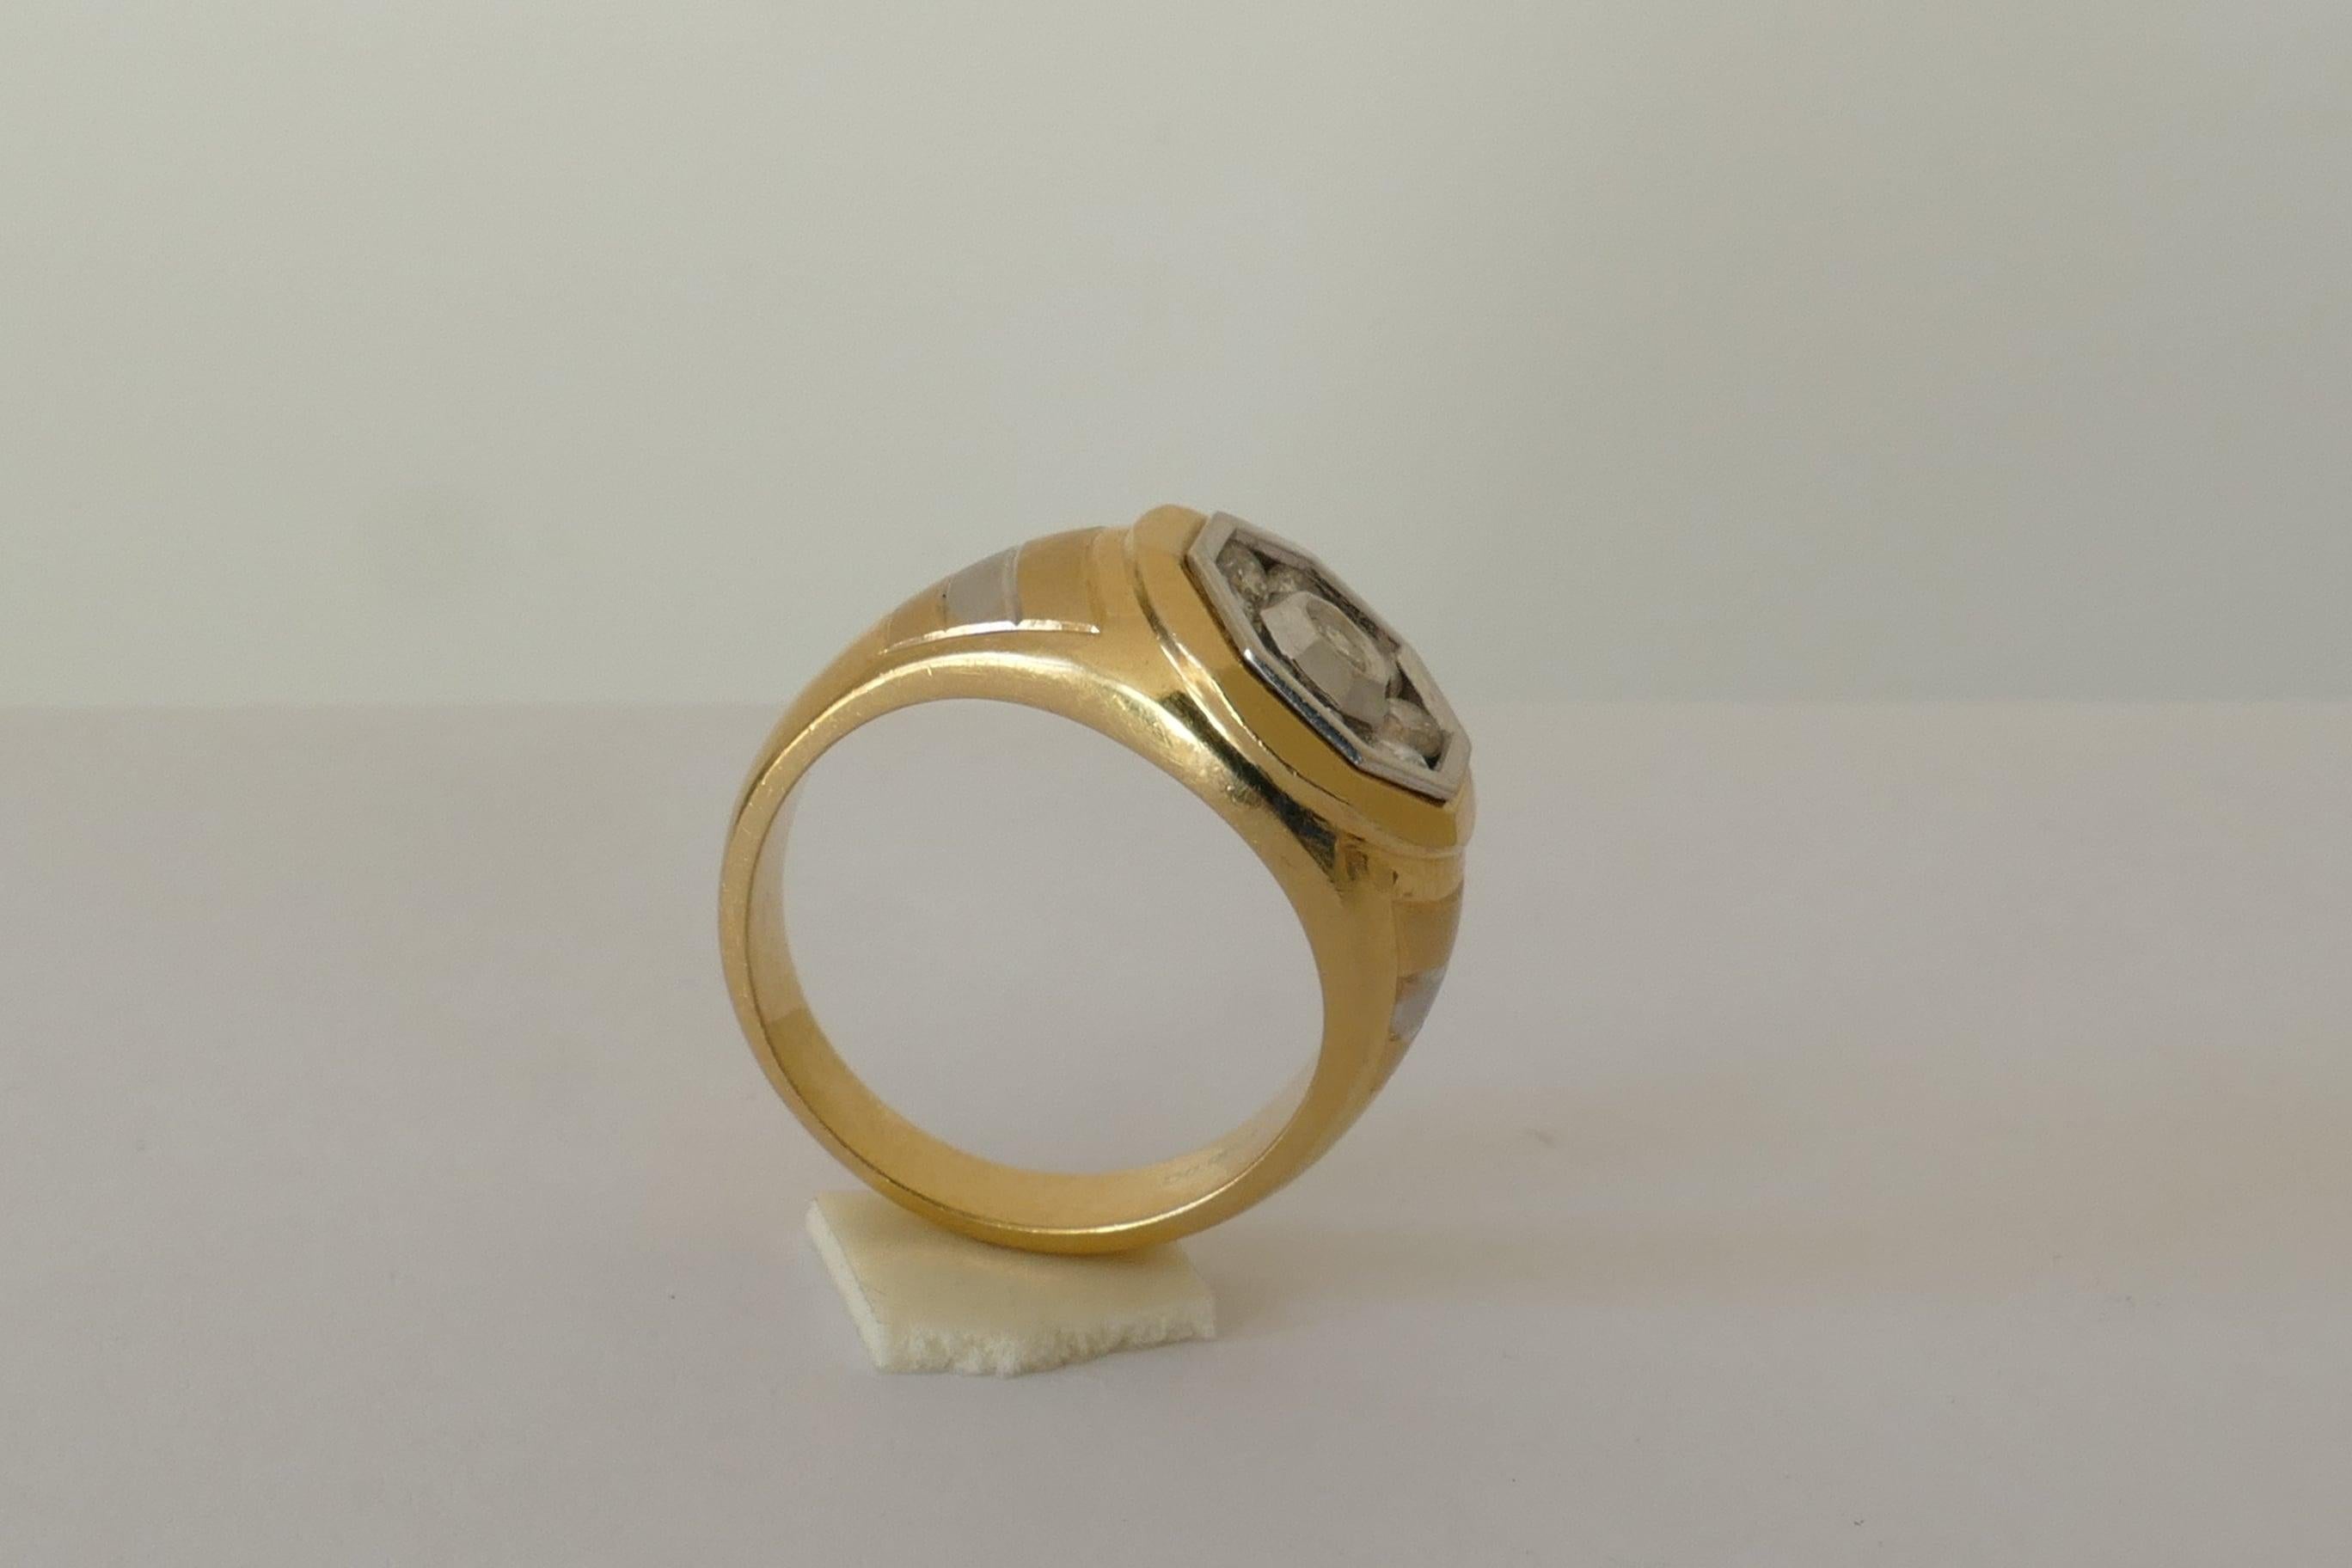 Excellent Colour Diamonds G/H make up this this Male - but could also be appealing to a Female - Ring. 
There are 9 Diamonds totalling close to 1 carat in weight.
The Ring shows a very attractive Design of Yellow Gold striped with White Gold down